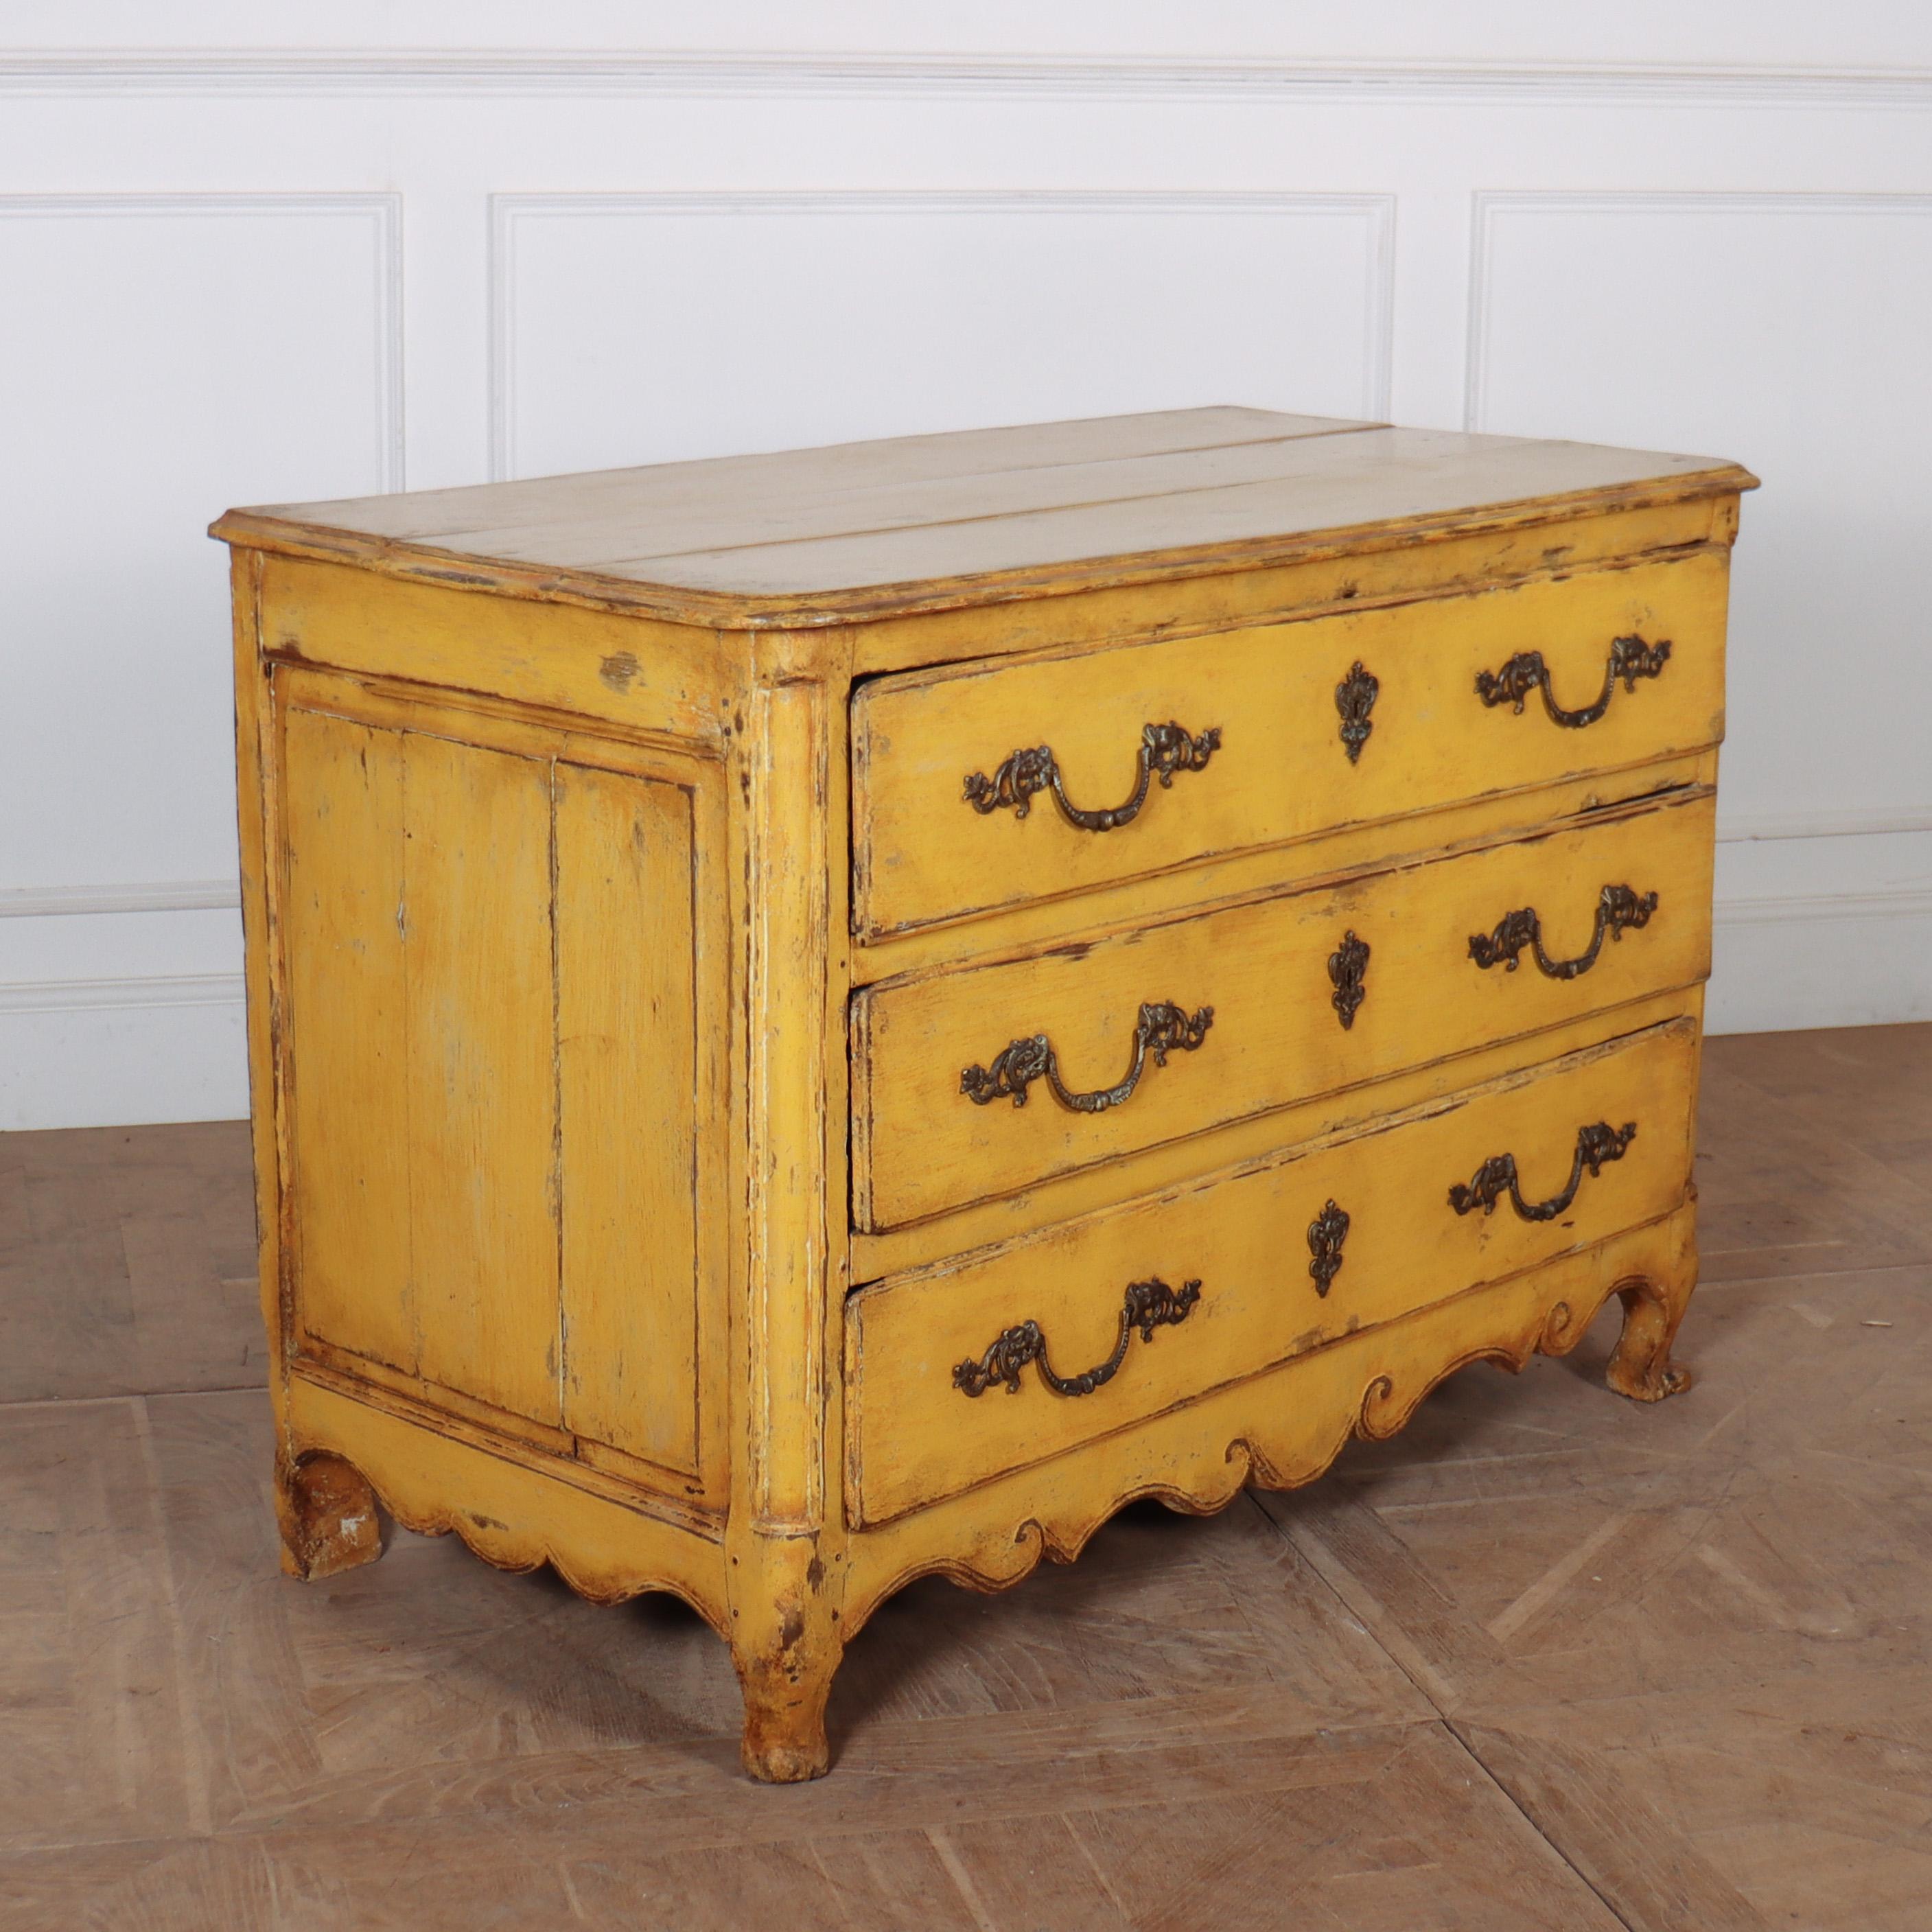 Fabulous 18th C French original painted oak commode. 1780.

Reference: 8112

Dimensions
49.5 inches (126 cms) Wide
25 inches (64 cms) Deep
34.5 inches (88 cms) High